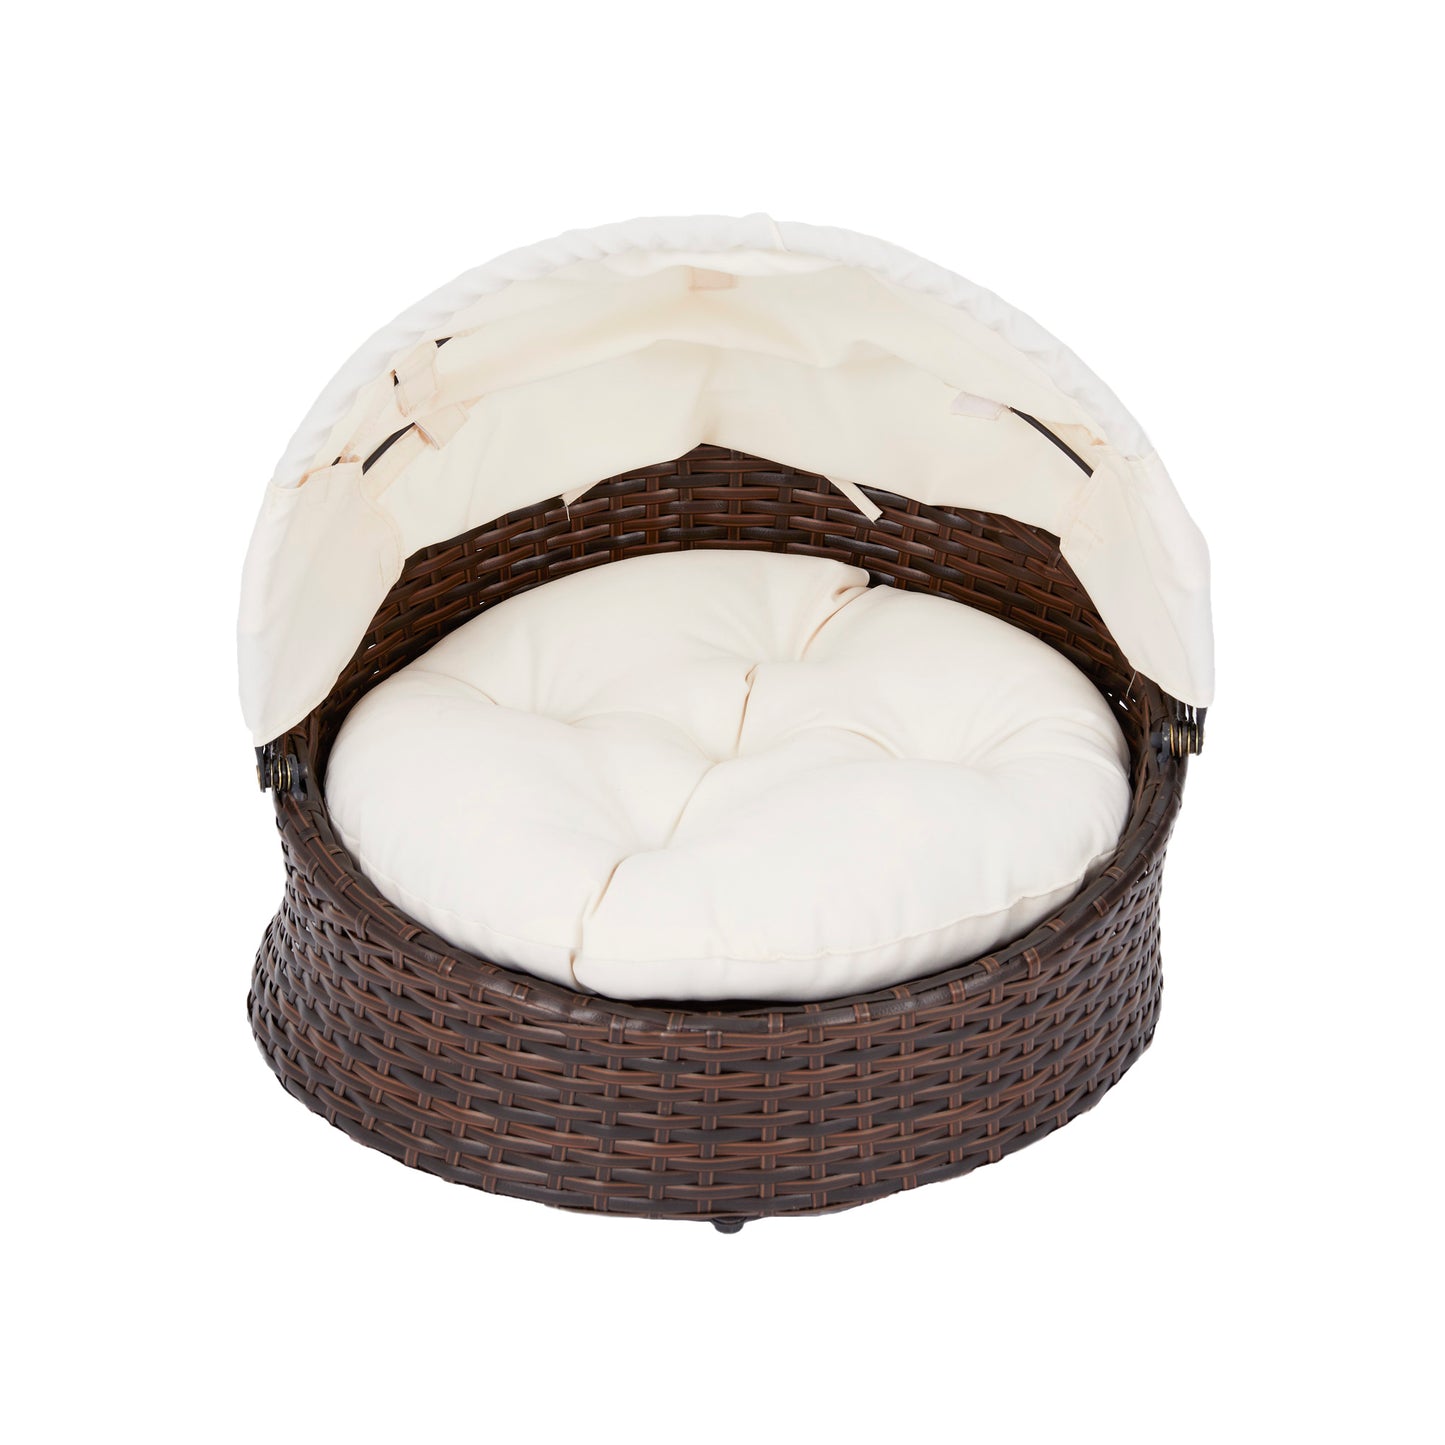 The Comfy, Modern, Woven Round Bed & Cushion